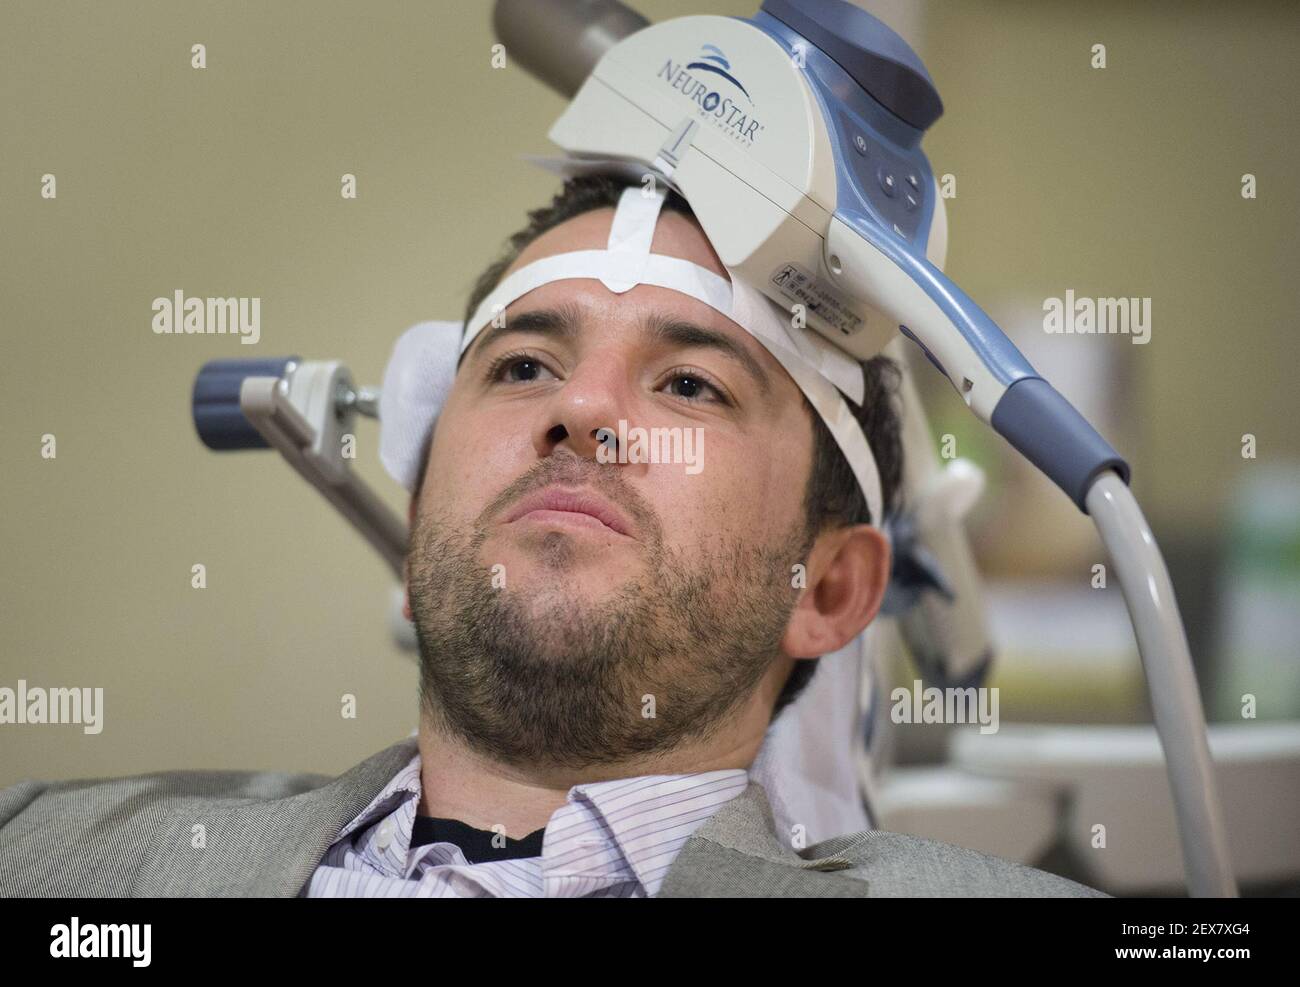 31-year-old Nicholas O'Madden, who suffers from anxiety and depression, receives treatment with Transcranial Magnetic Stimulation (TMS) therapy, which uses a large magnet to stimulate certain parts of the brain to alleviate depressive symptoms at TMS Health Solutions on July 2, 2015 in Sacramento, Calif. (Photo by Randy Pench/Sacramento Bee/TNS) *** Please Use Credit from Credit Field *** Stock Photo